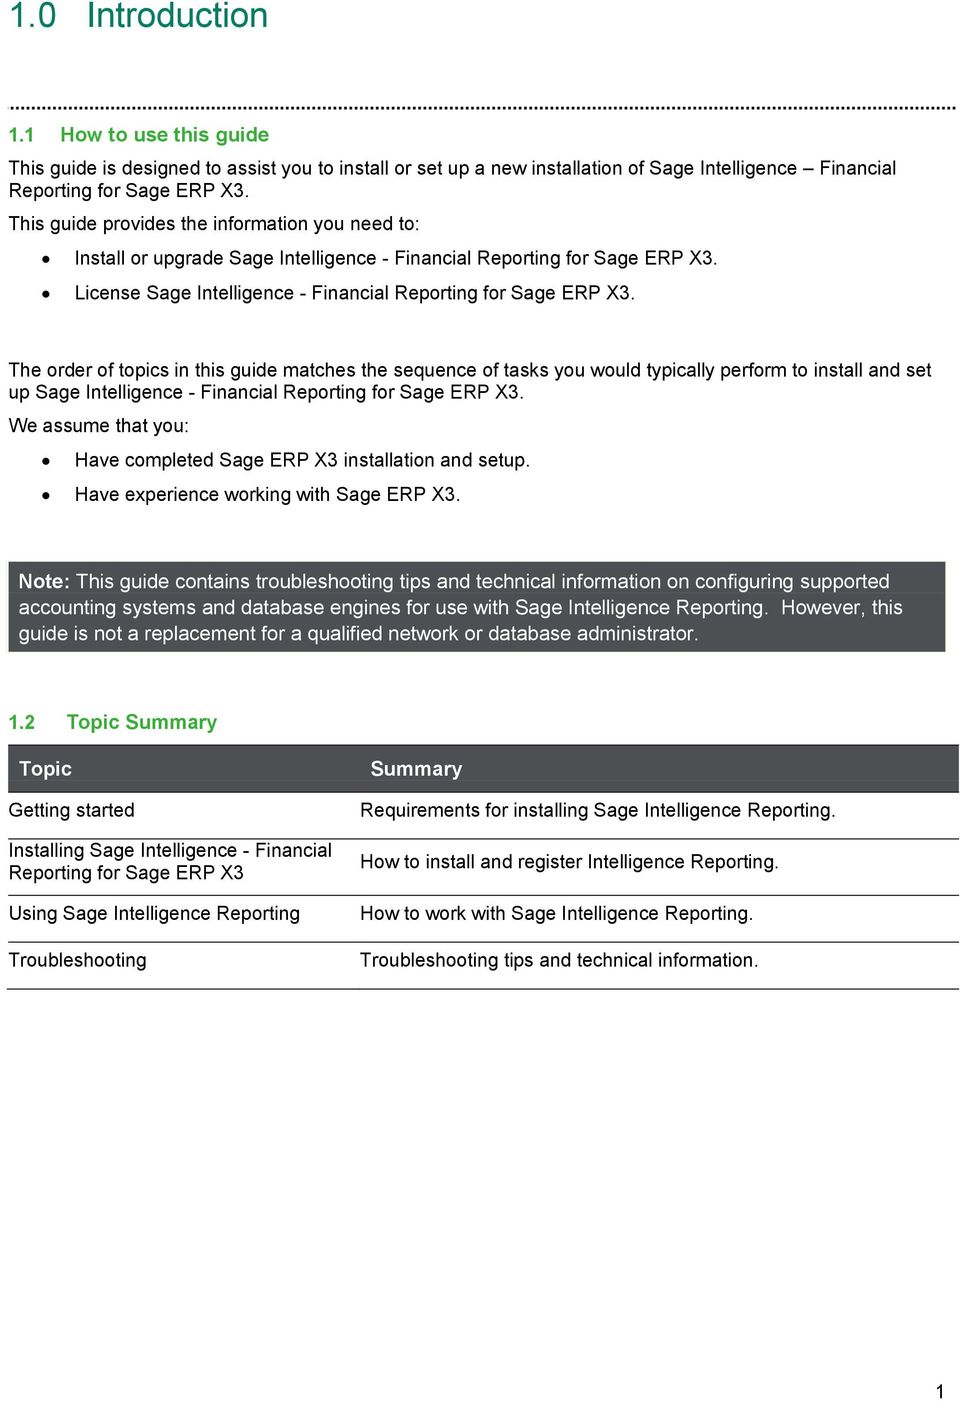 The order of topics in this guide matches the sequence of tasks you would typically perform to install and set up Sage Intelligence - Financial Reporting for Sage ERP X3.